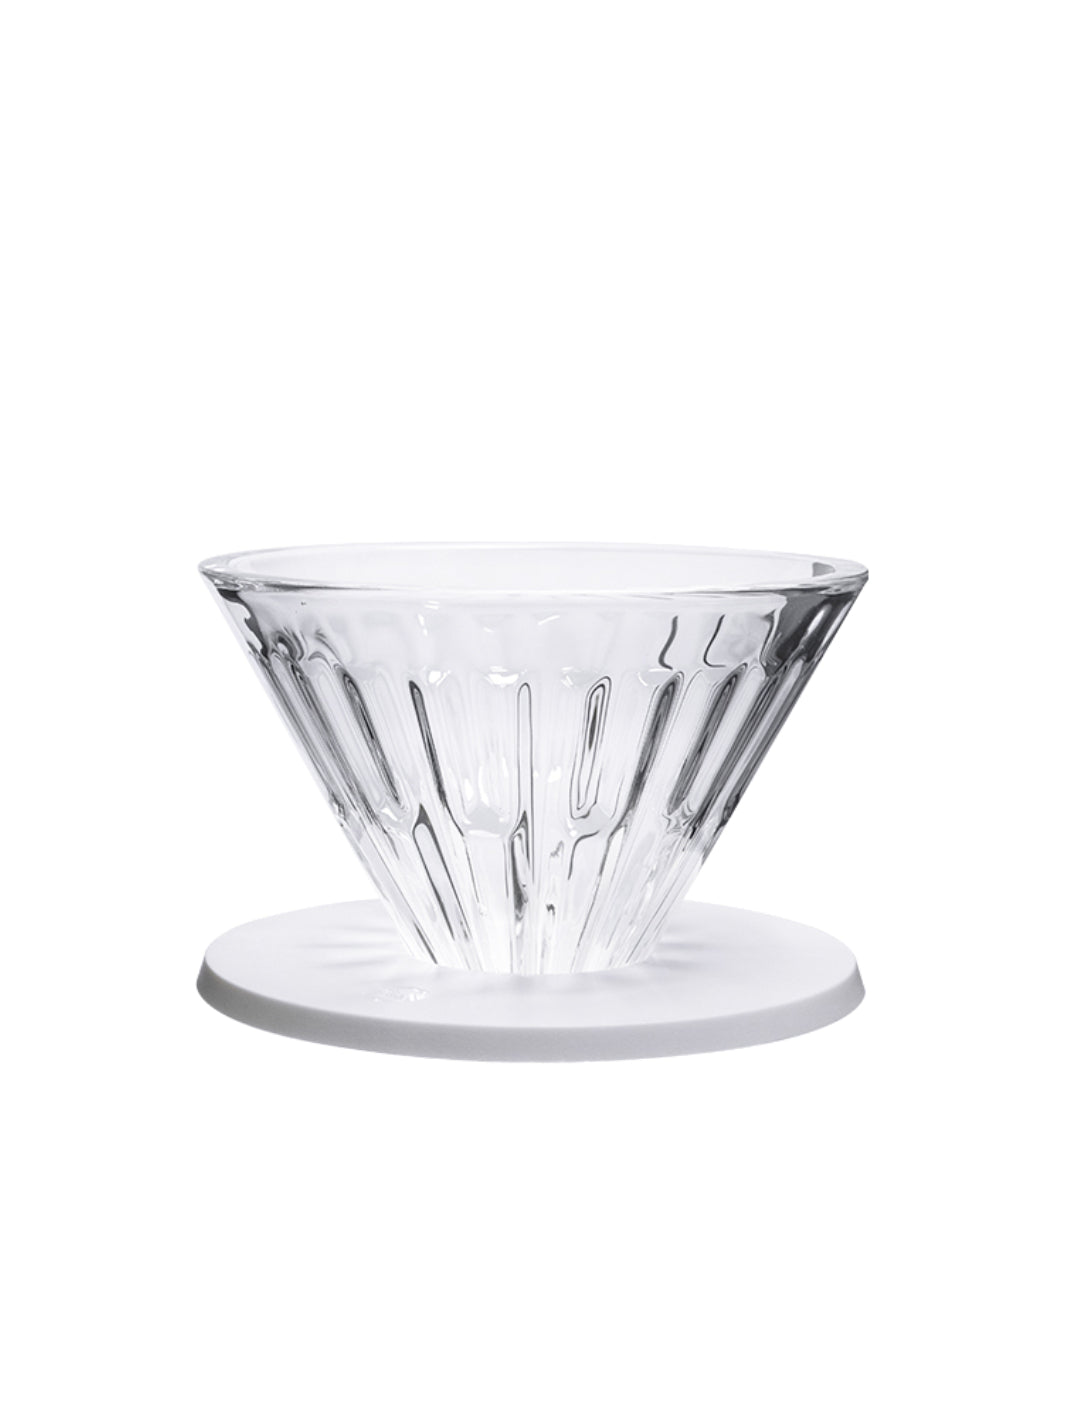 TIMEMORE Crystal Eye Glass Dripper with Holder